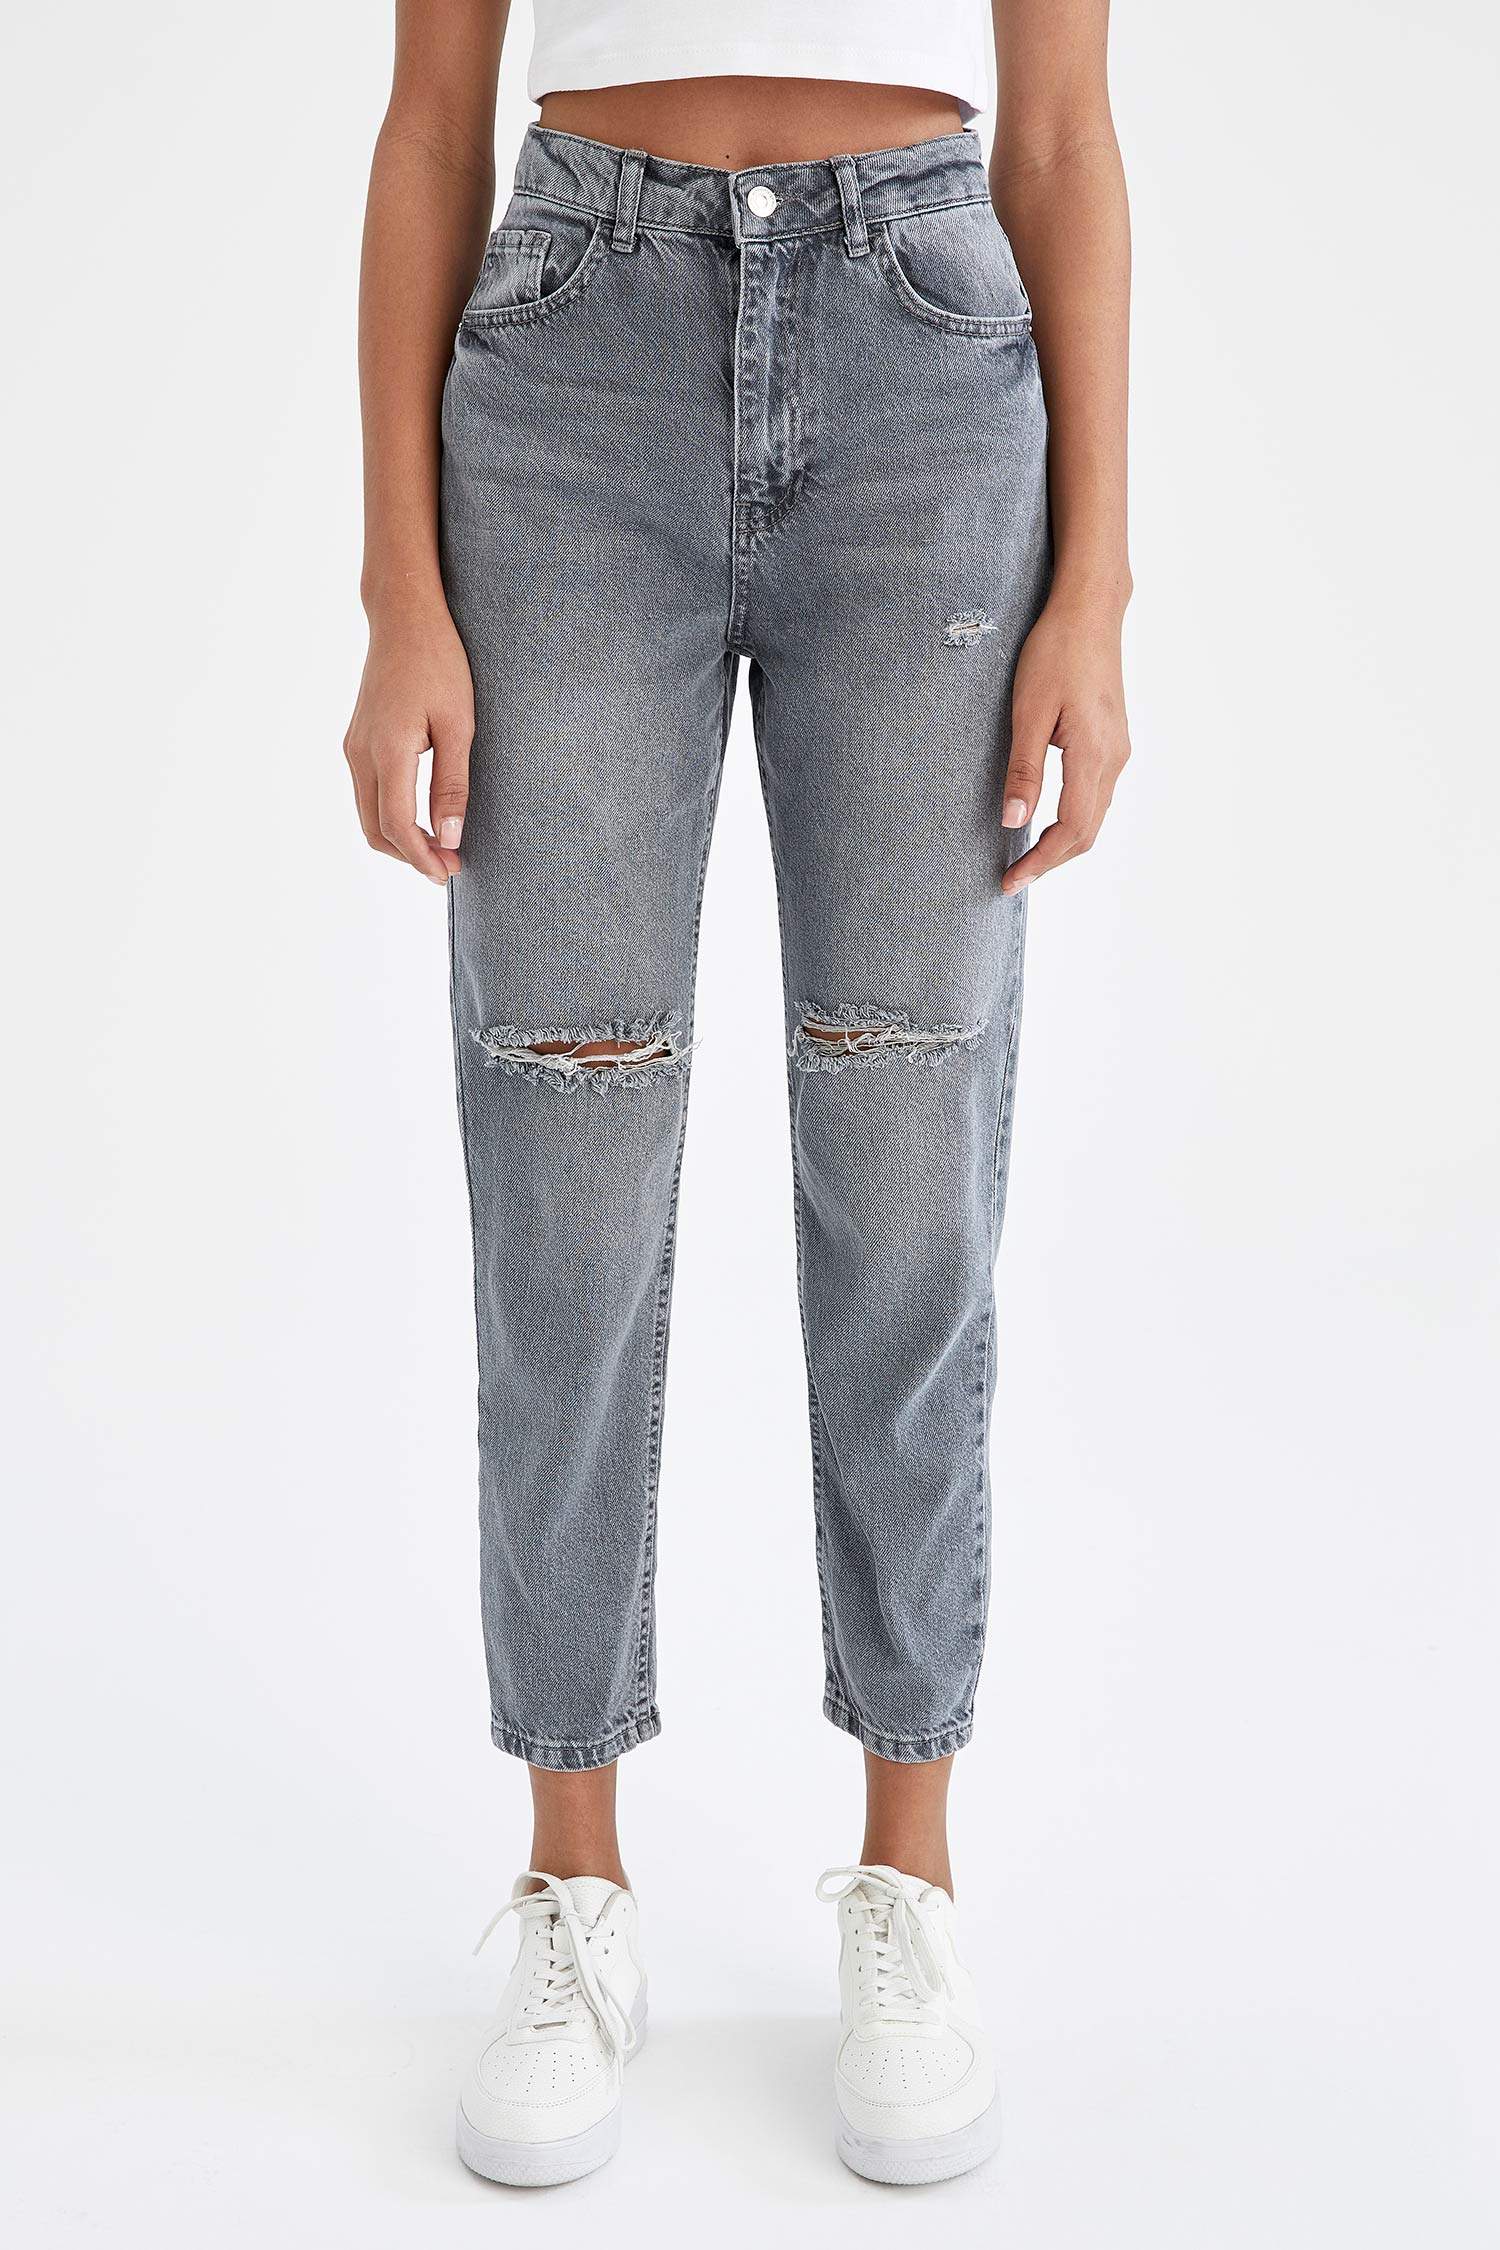 veld Plasticiteit wagon Grey WOMAN Mom Fit High Waisted Ankle Jeans 2609176 | DeFacto